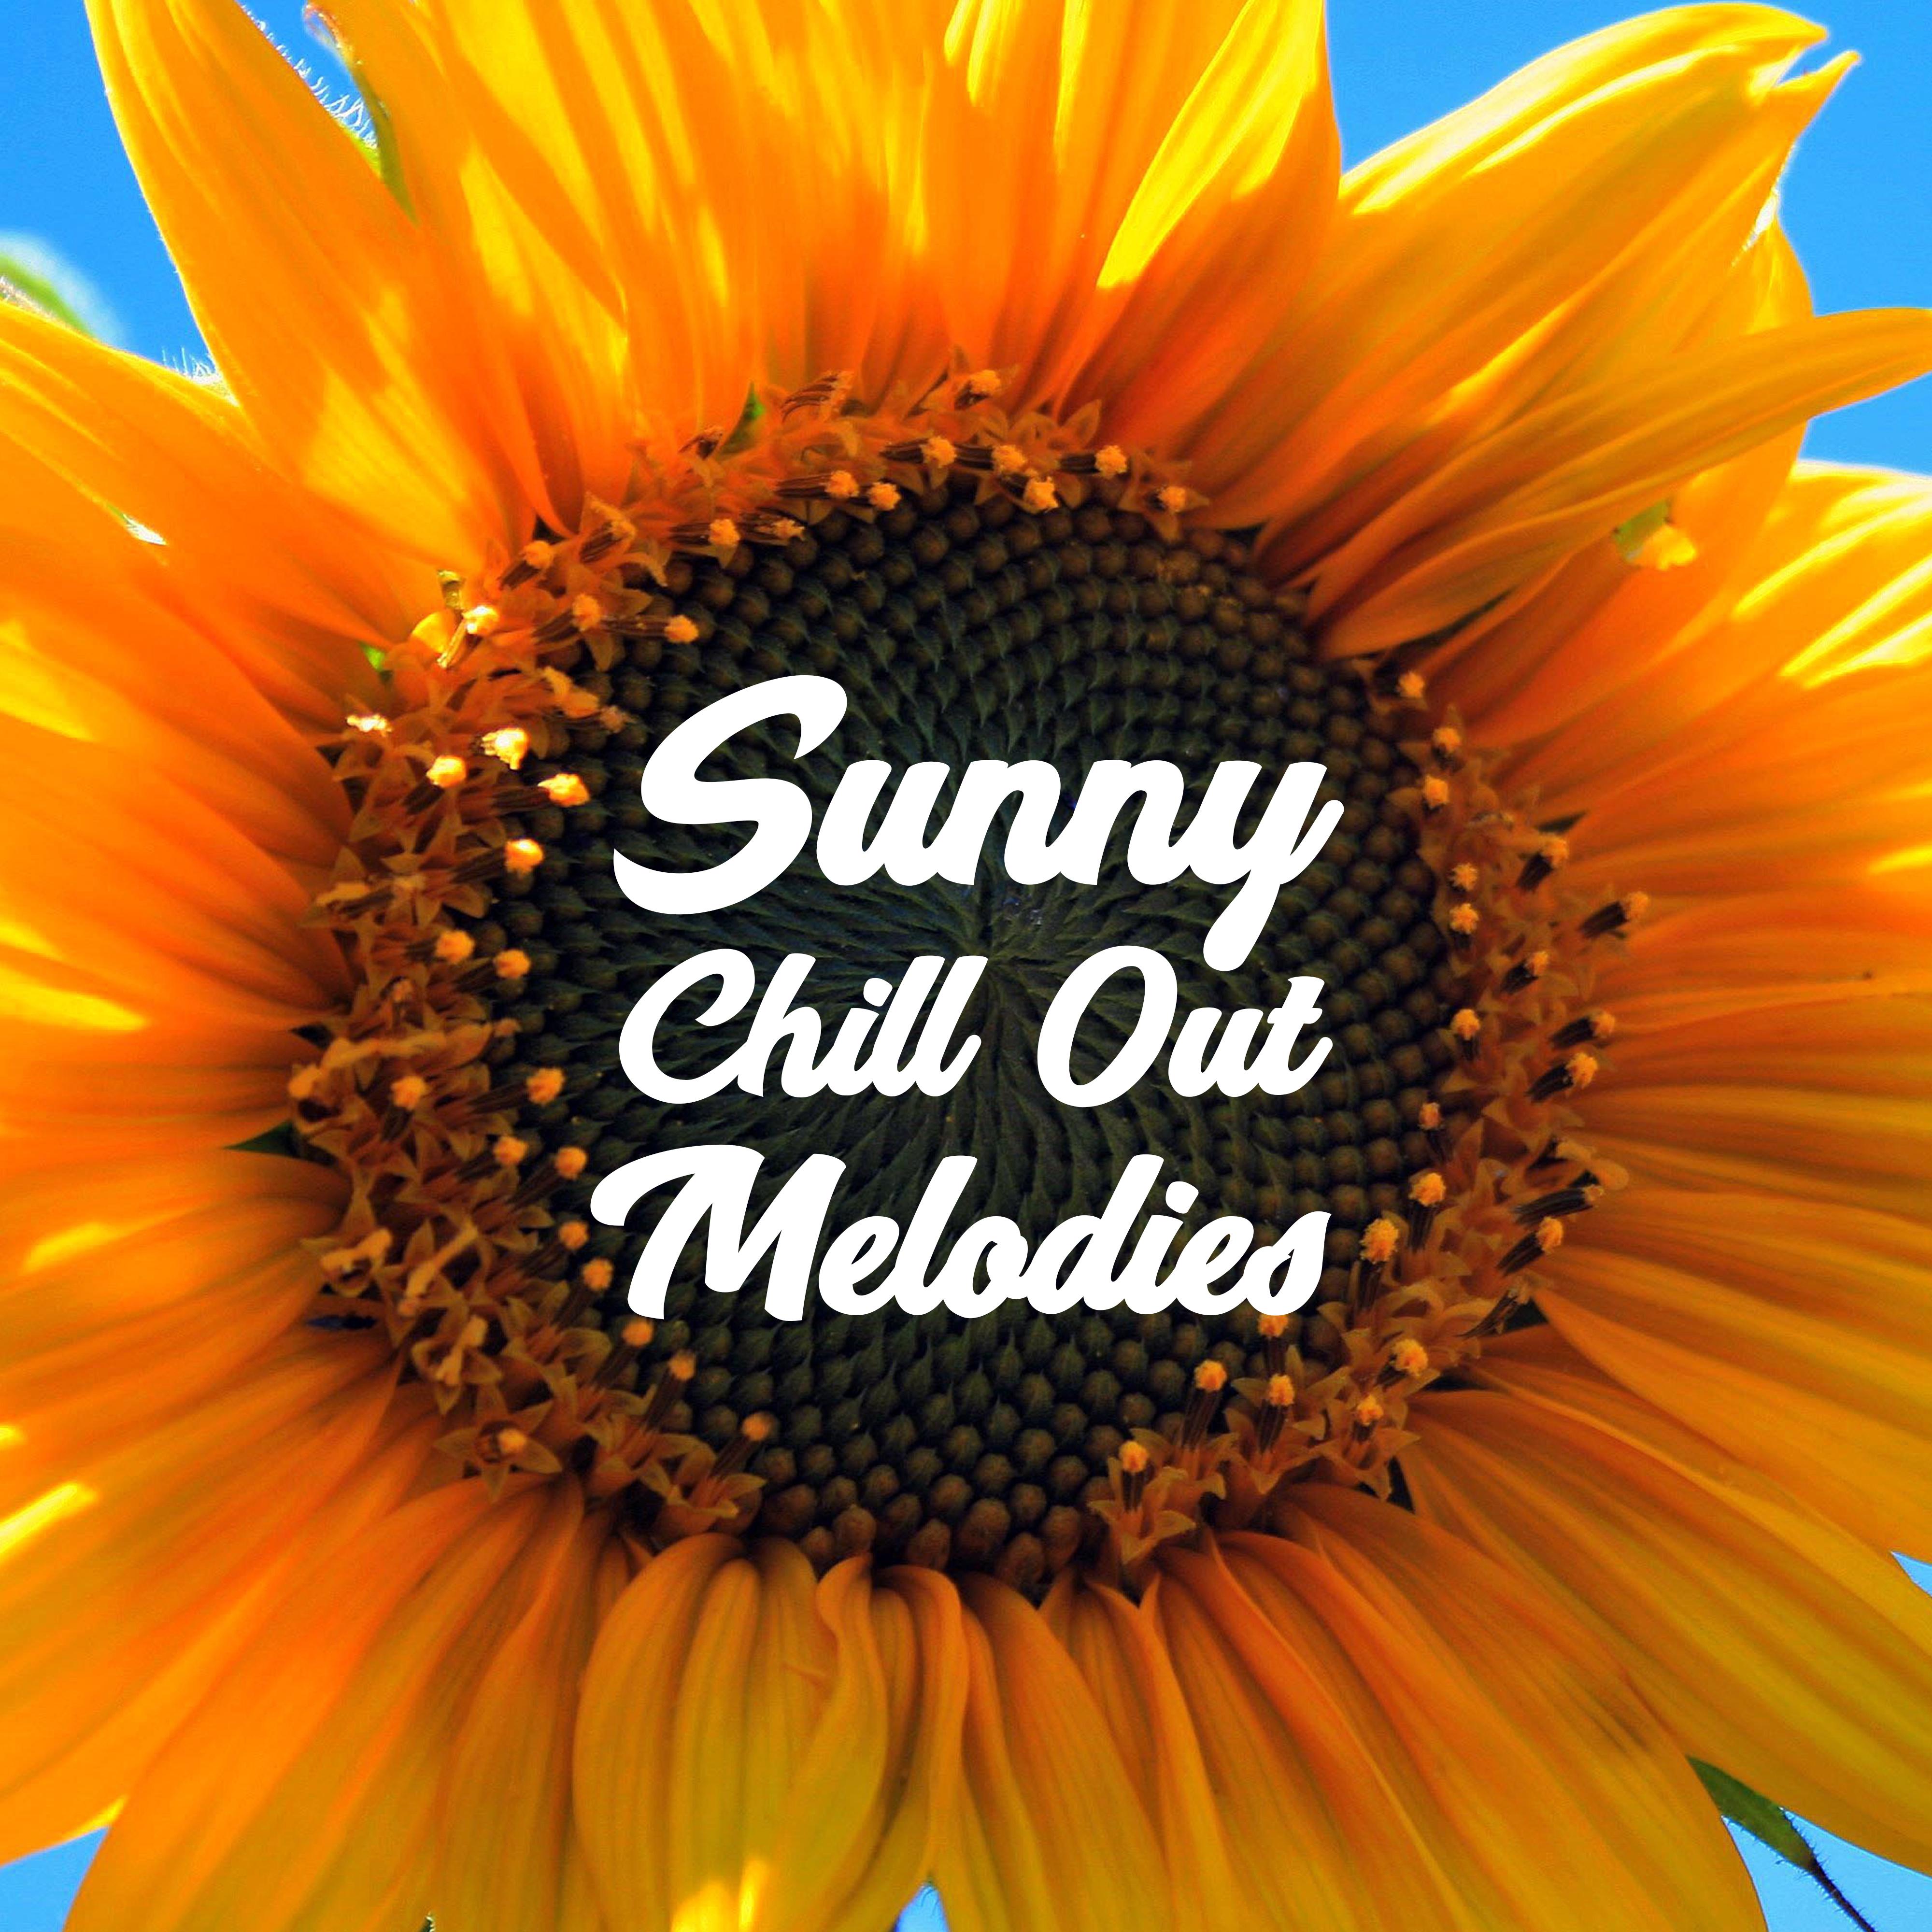 Sunny Chill Out Melodies